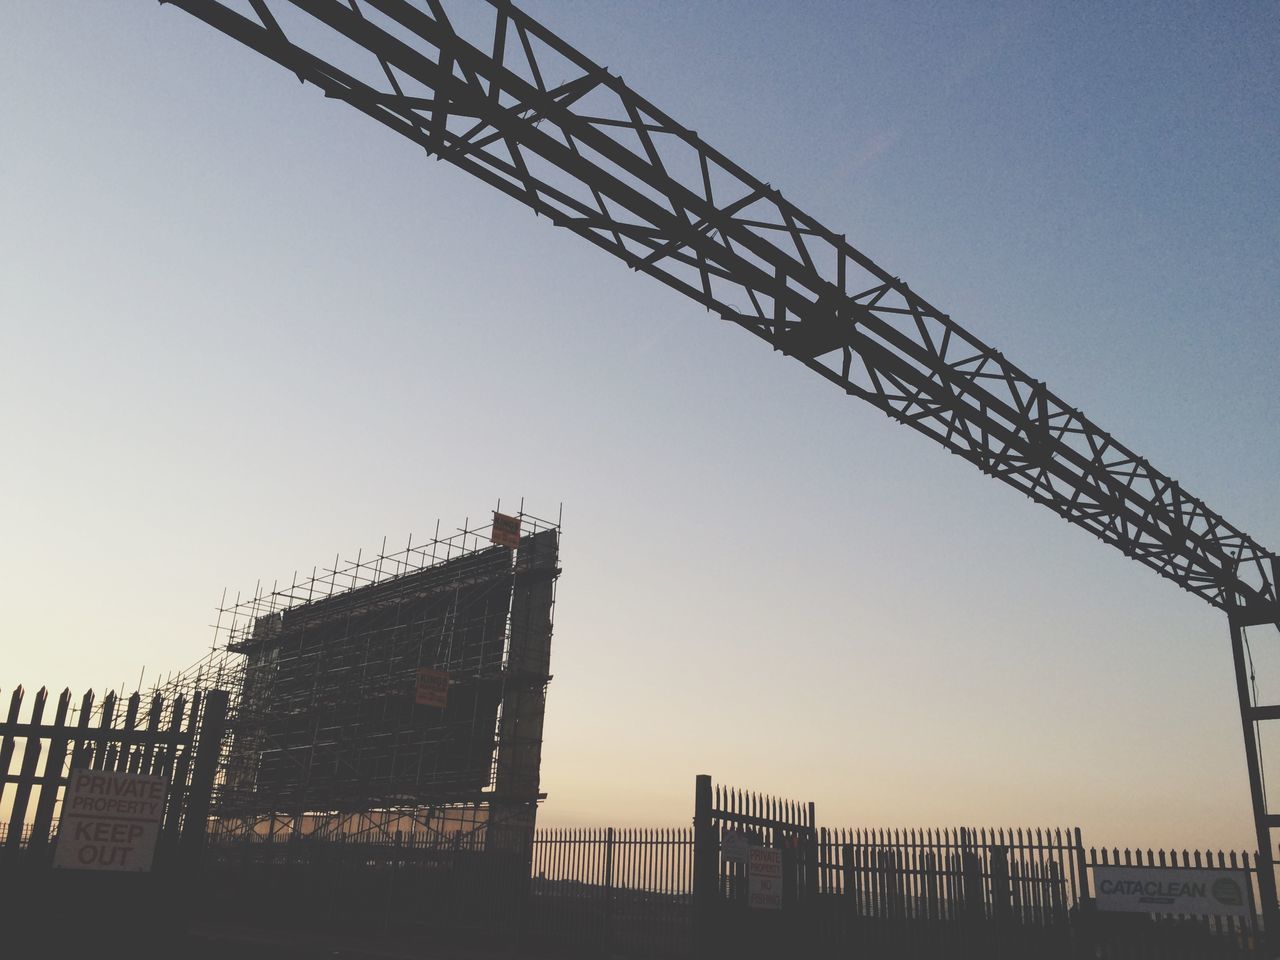 clear sky, built structure, architecture, low angle view, construction site, copy space, building exterior, silhouette, metal, crane - construction machinery, construction, development, sky, metallic, industry, incomplete, outdoors, crane, connection, sunset